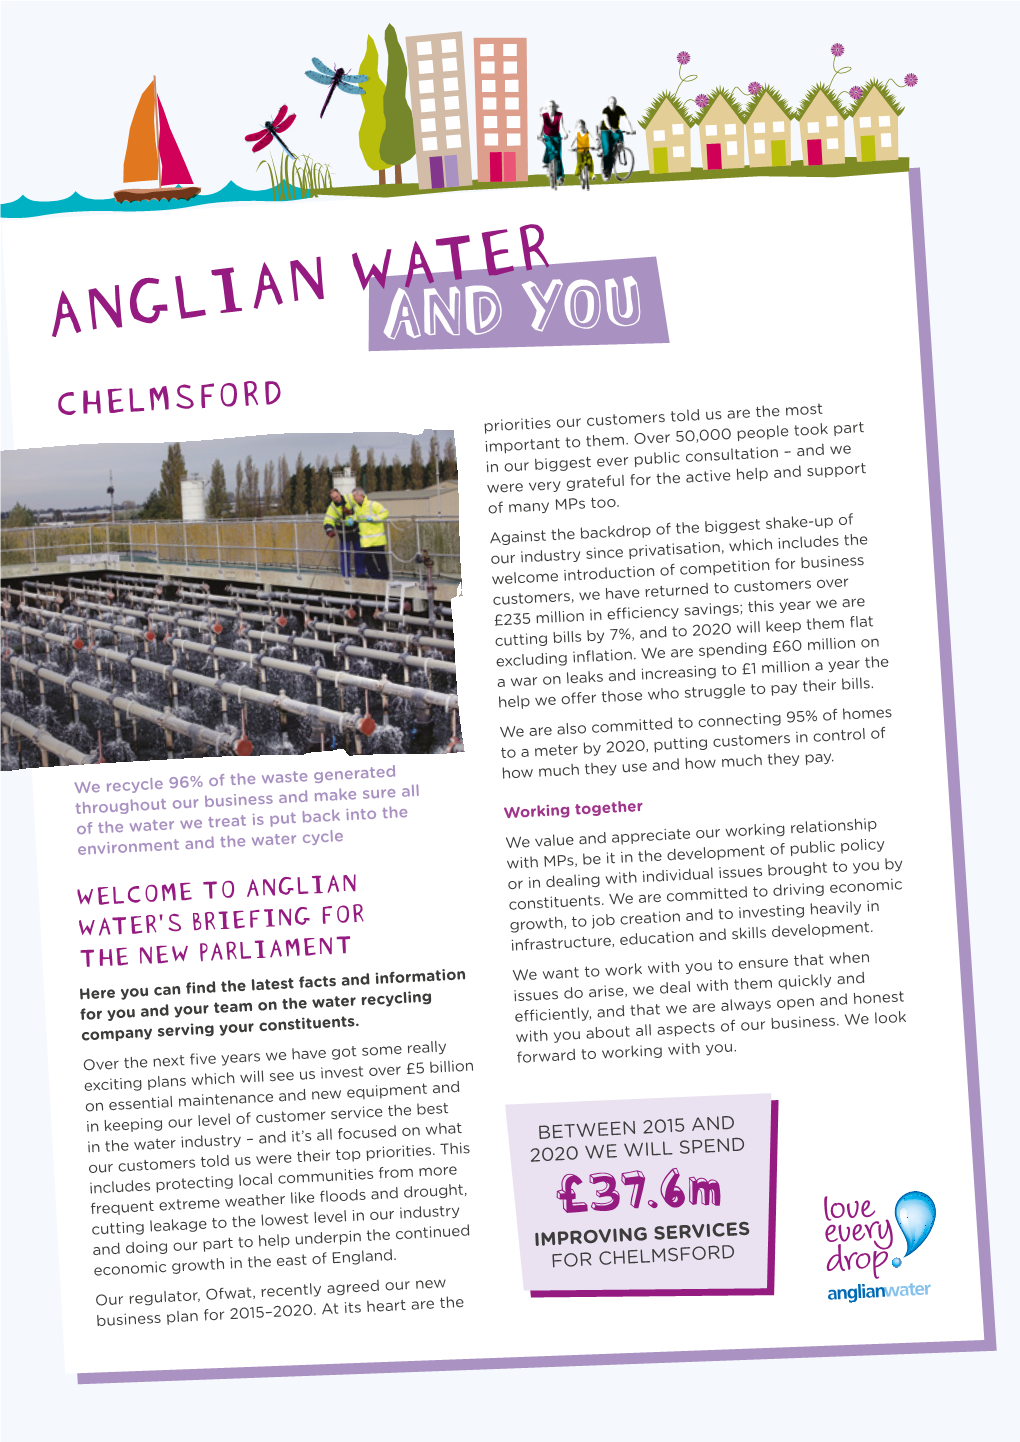 ANGLIAN WATERAND YOU CHELMSFORD Priorities Our Customers Told Us Are the Most Important to Them